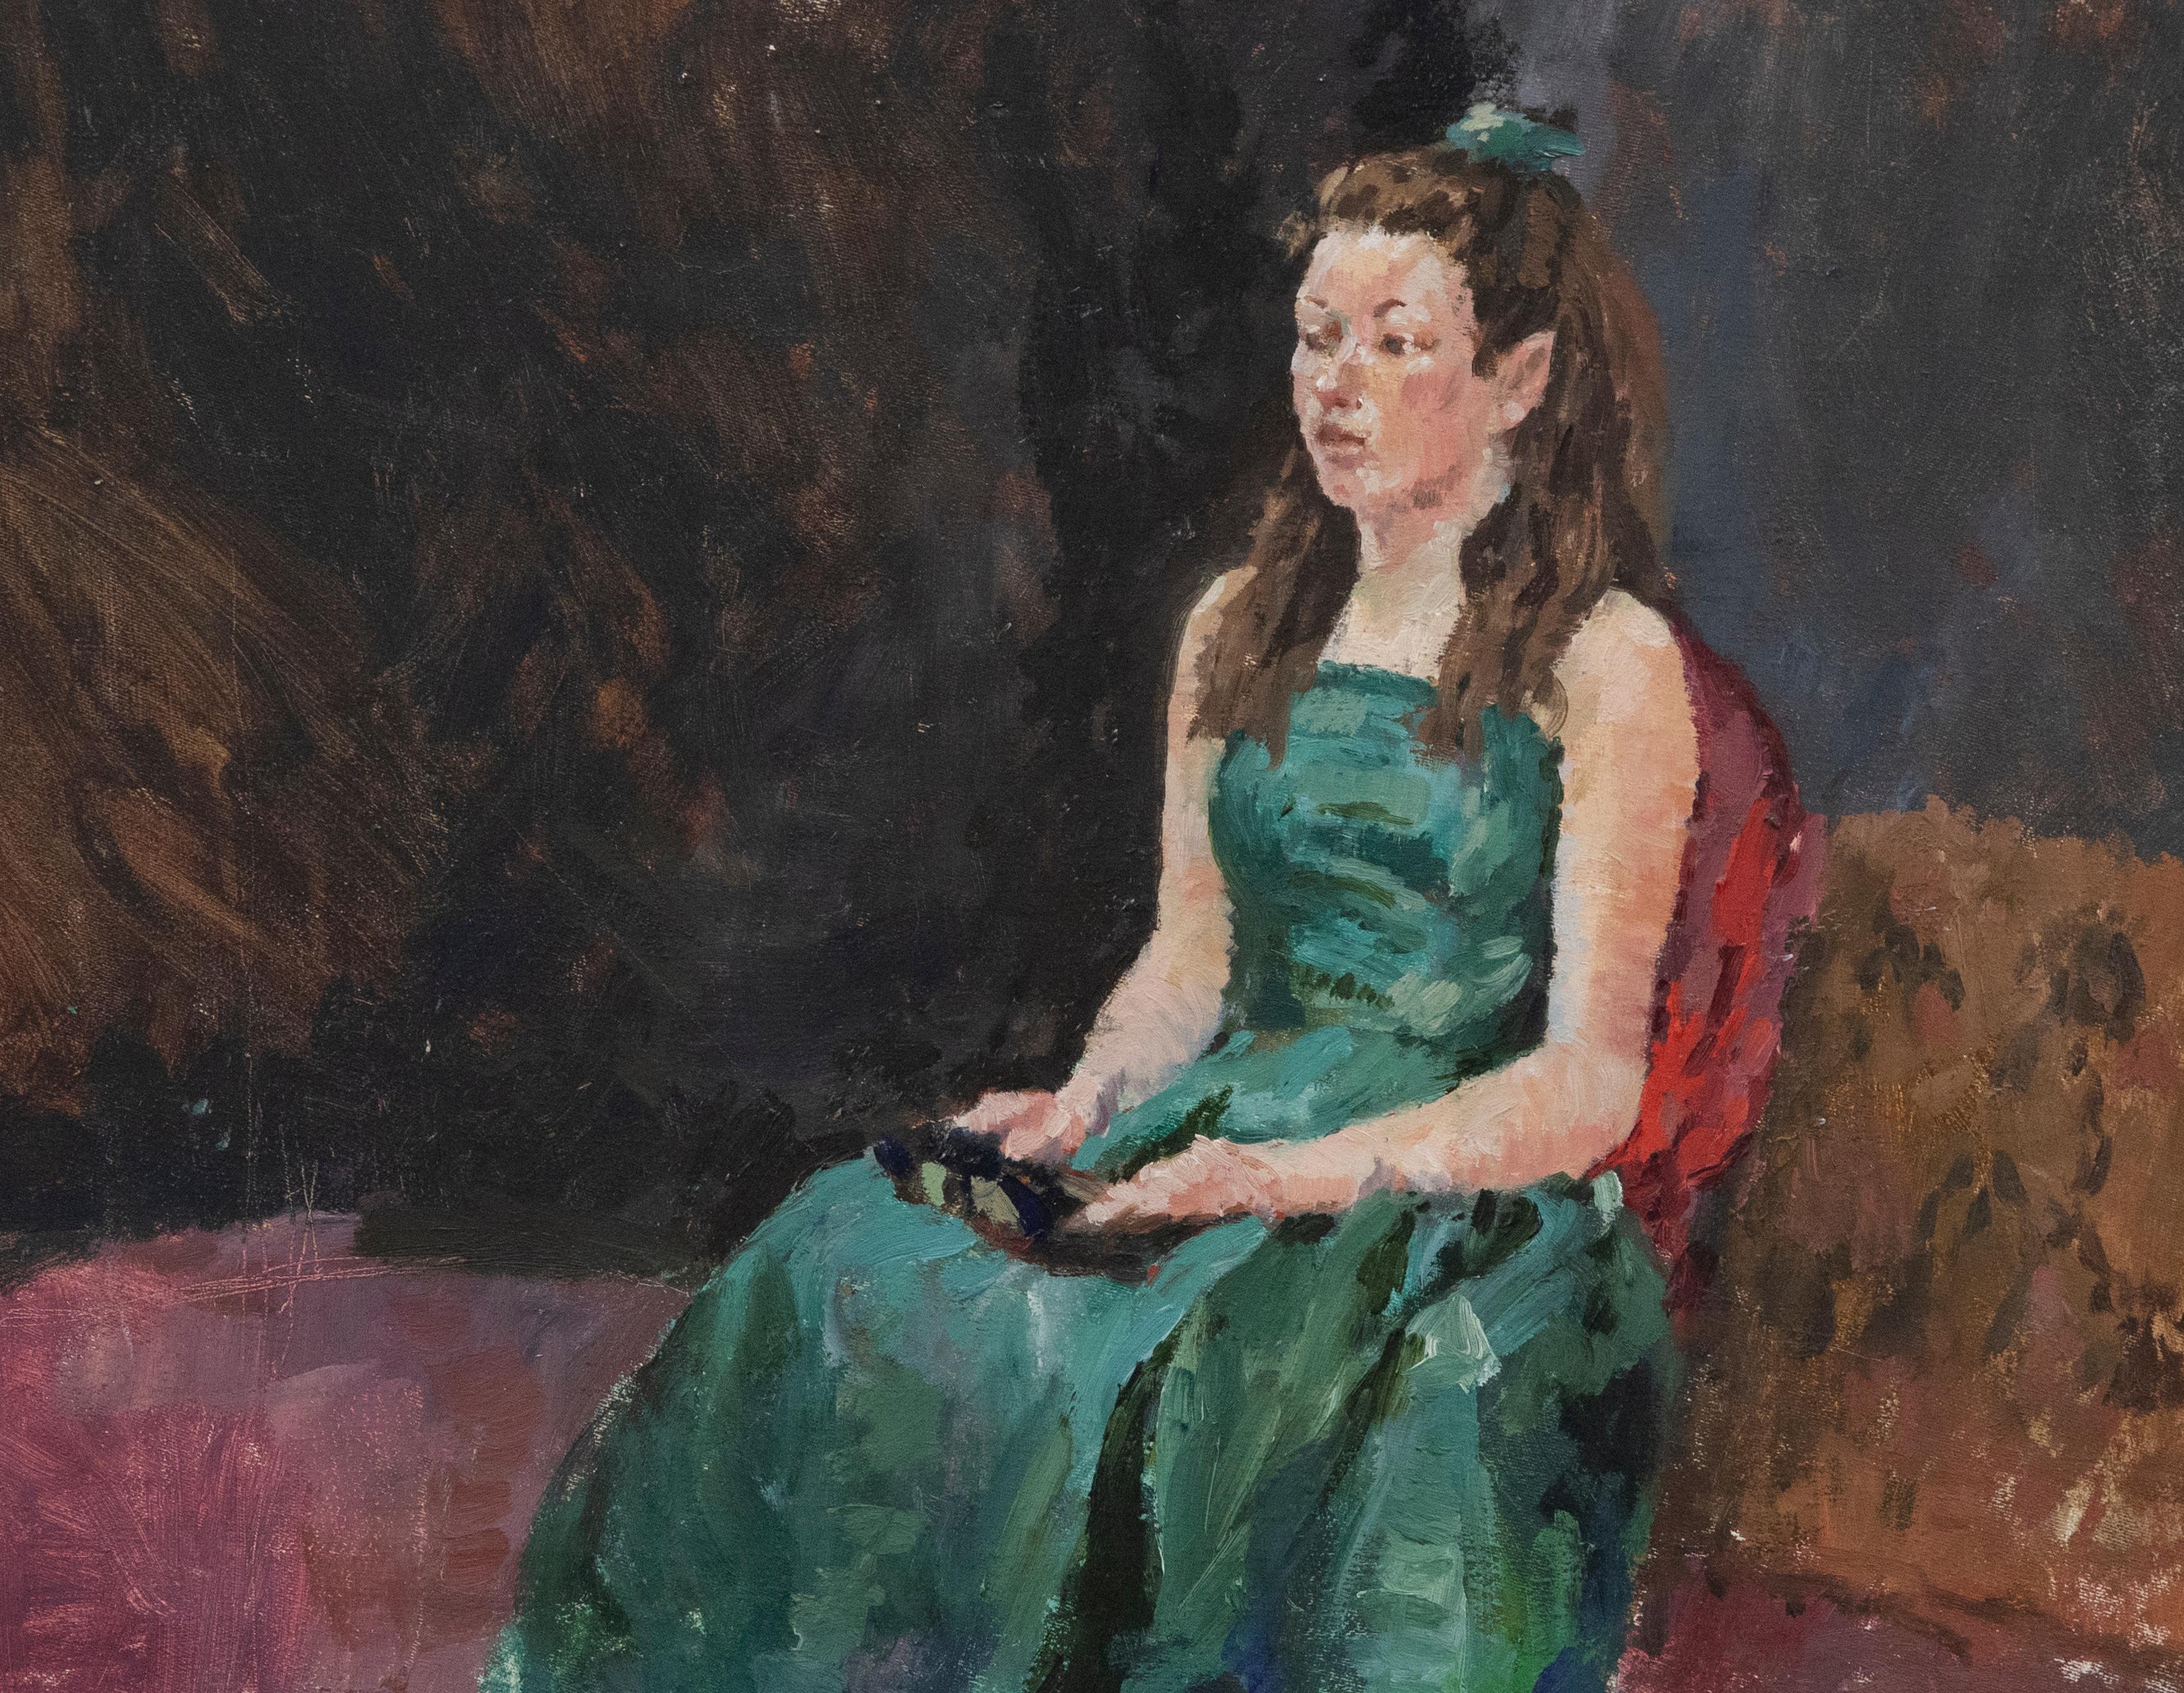 Unknown Portrait Painting - 20th Century Oil - The Emerald Green Dress